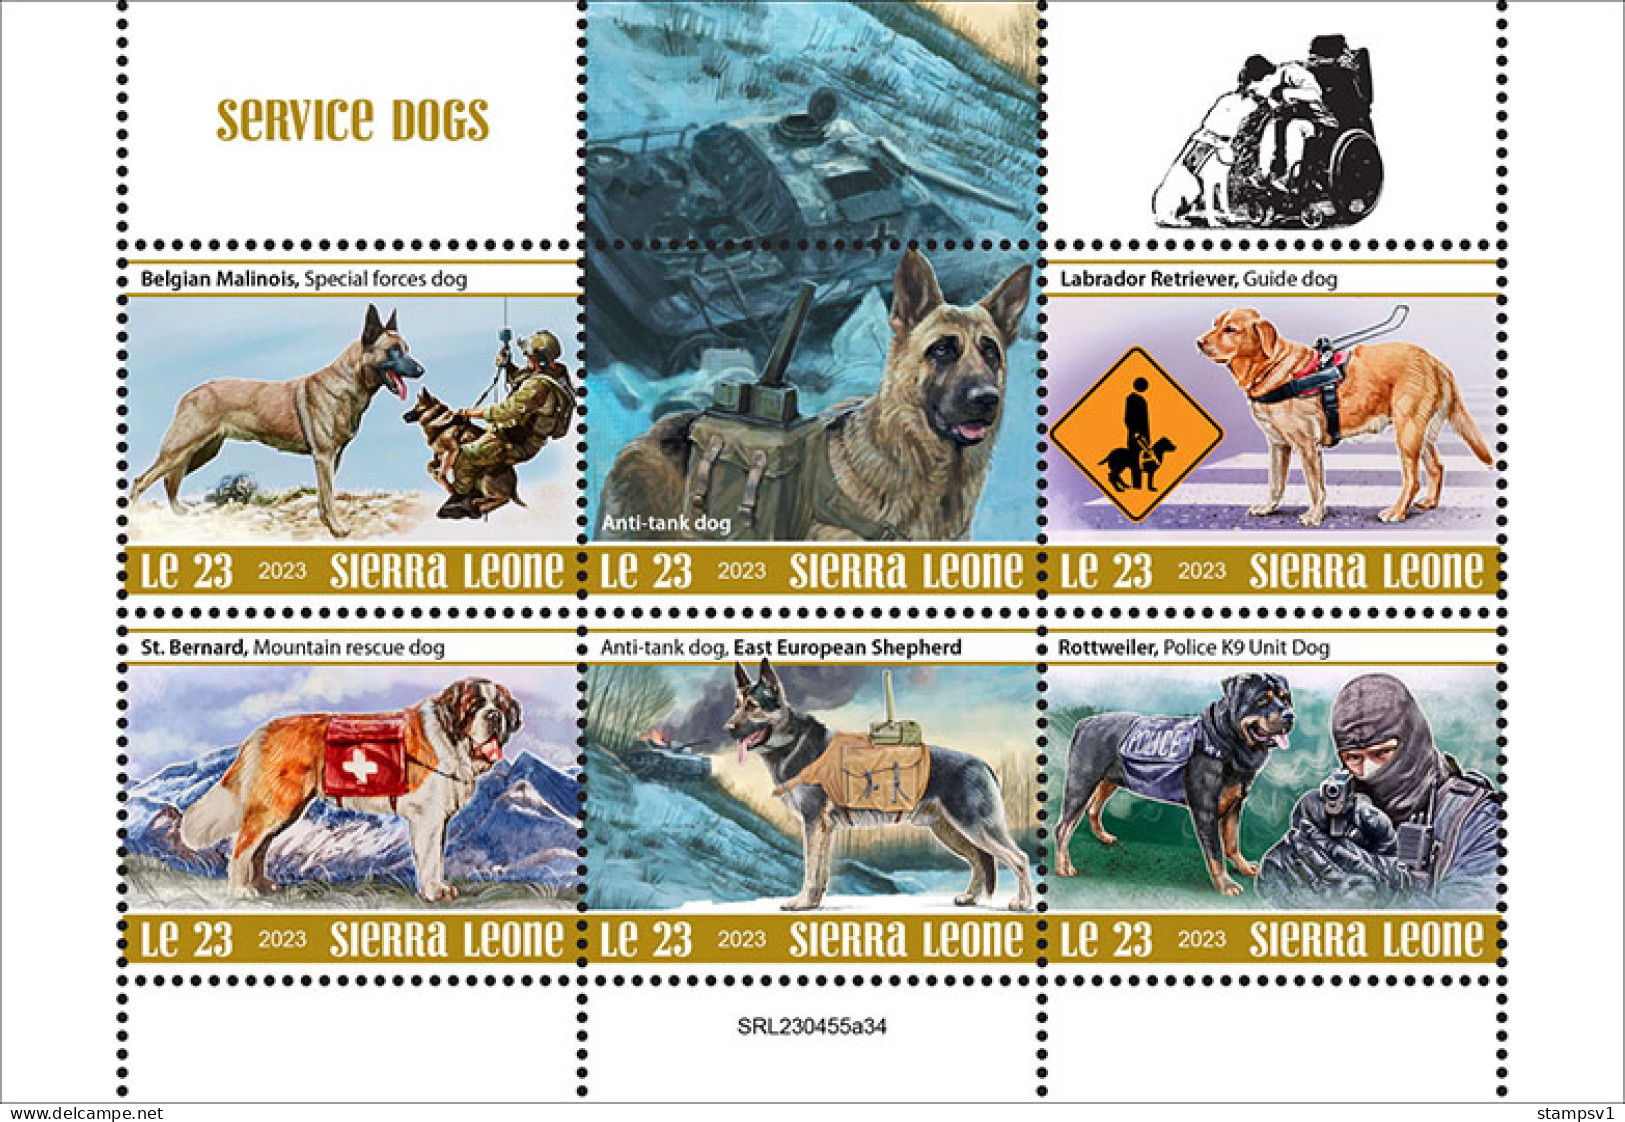 Sierra Leone  2023 Service Dogs. (445a34) OFFICIAL ISSUE - Dogs